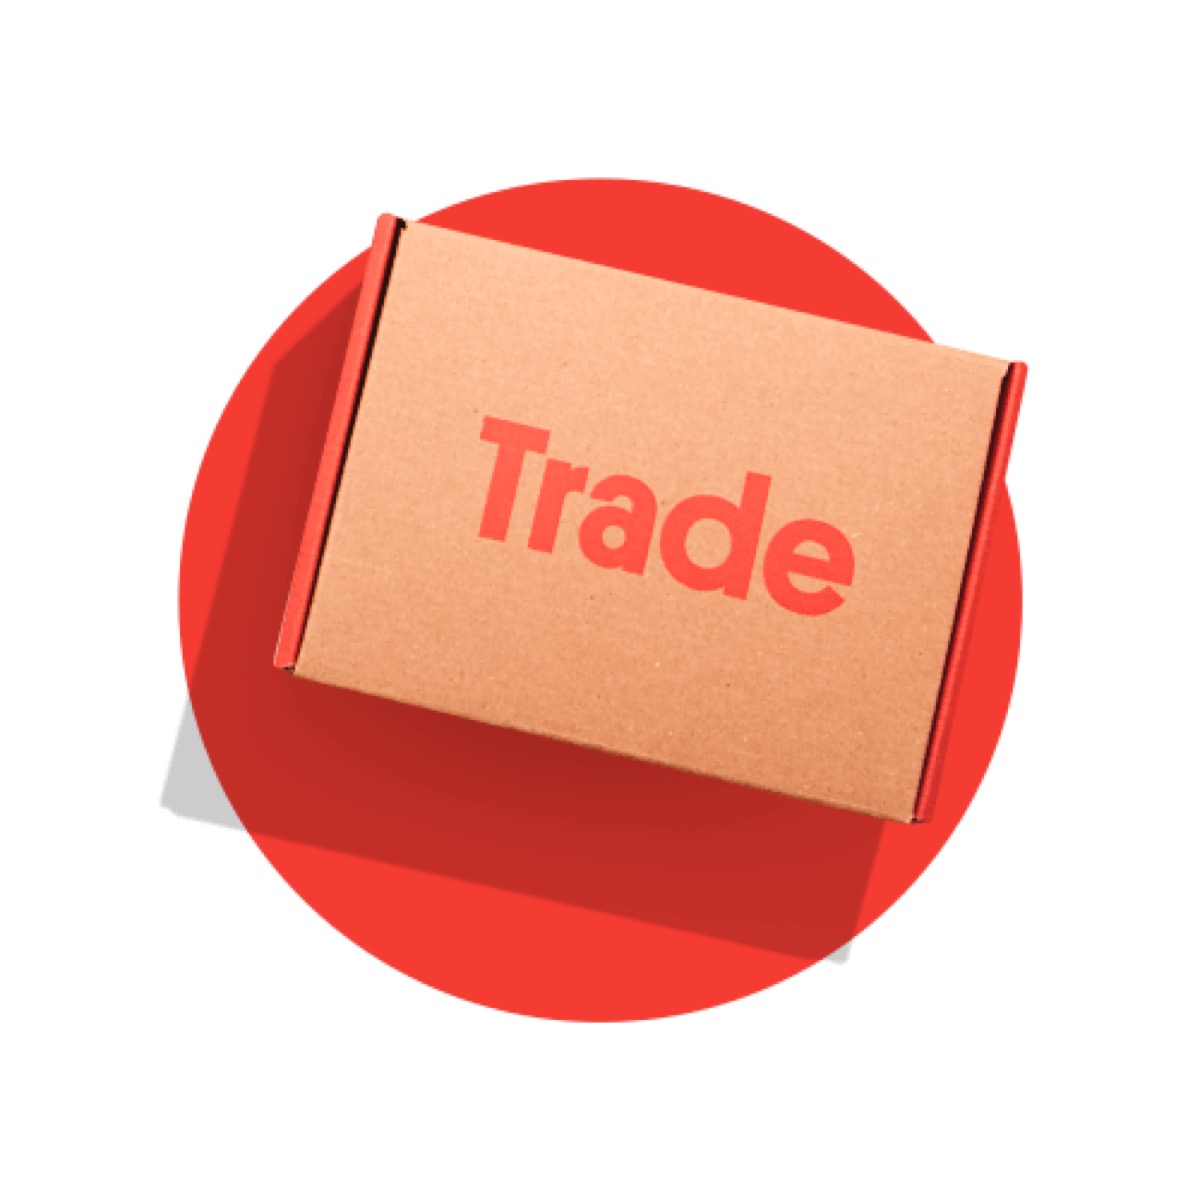 brown cardboard box from trade on red circle and white background